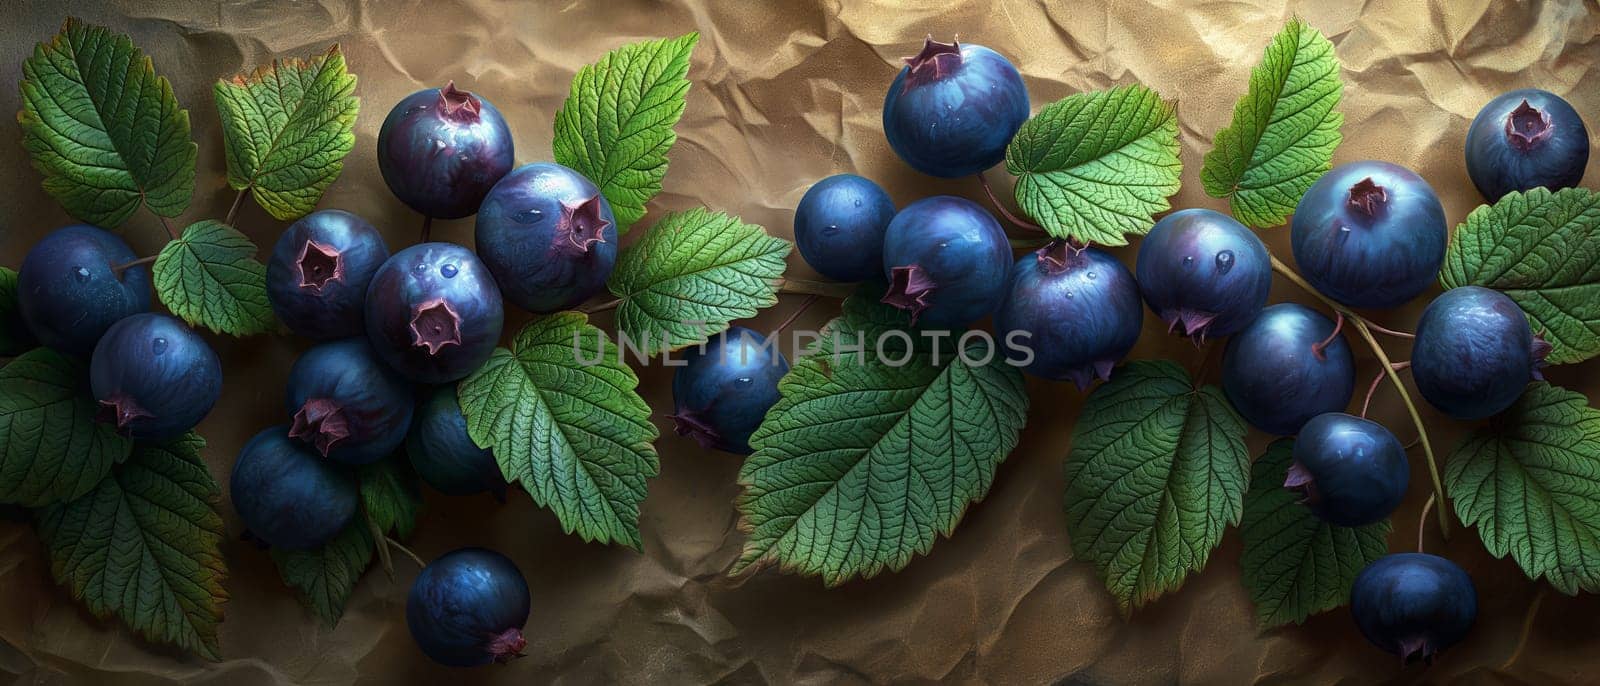 Blackcurrant berries and green leaves on wrinkled paper. by Fischeron